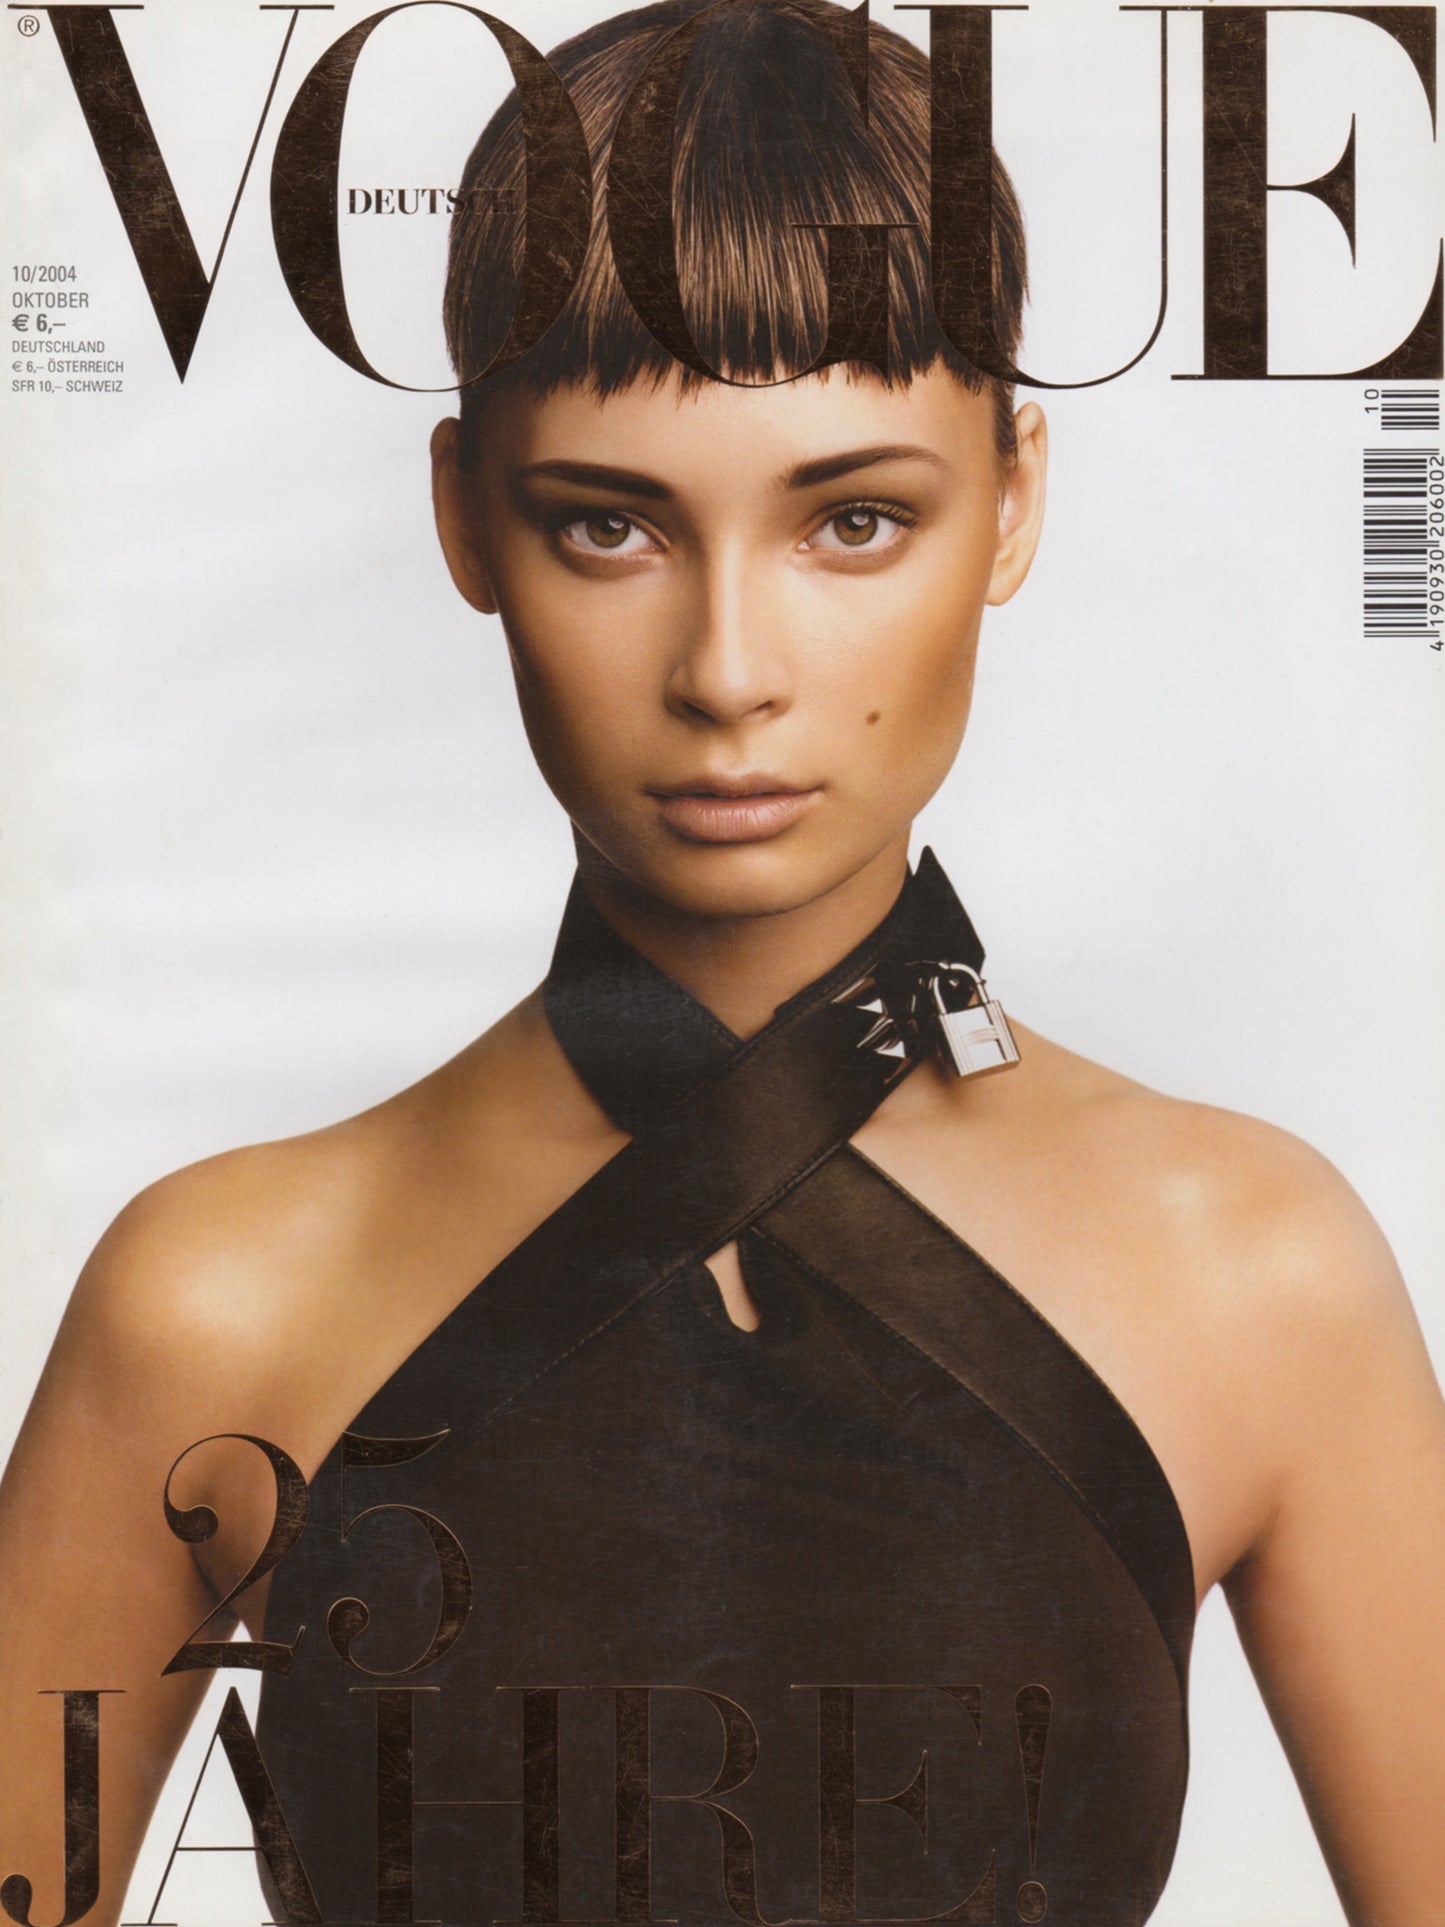 VOGUE GERMANY October 2004 - 25 Year Anniversary Issue